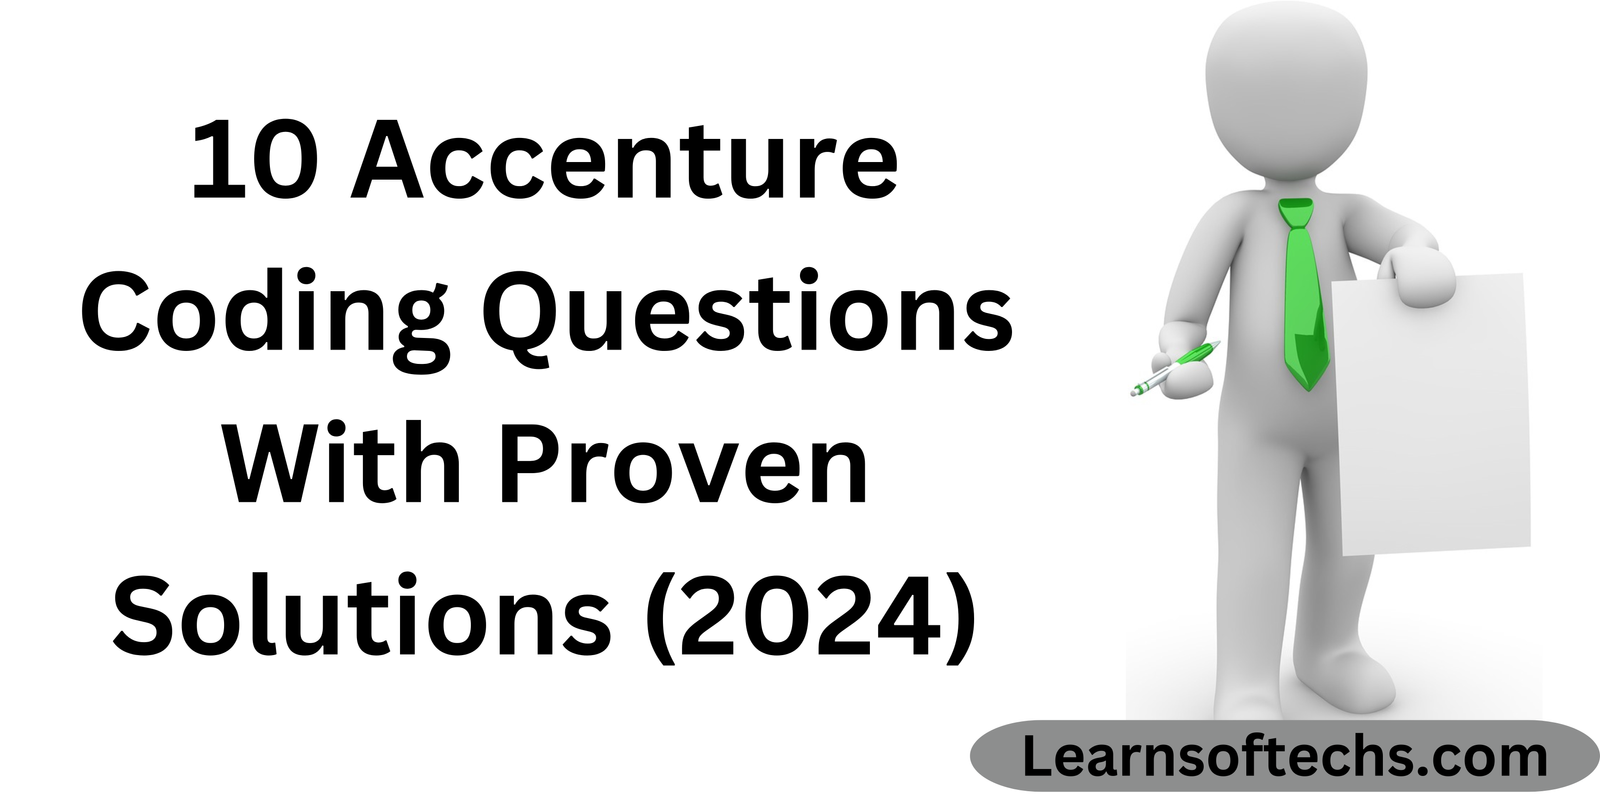 10 Accenture Coding Questions With Proven Solutions (2024)